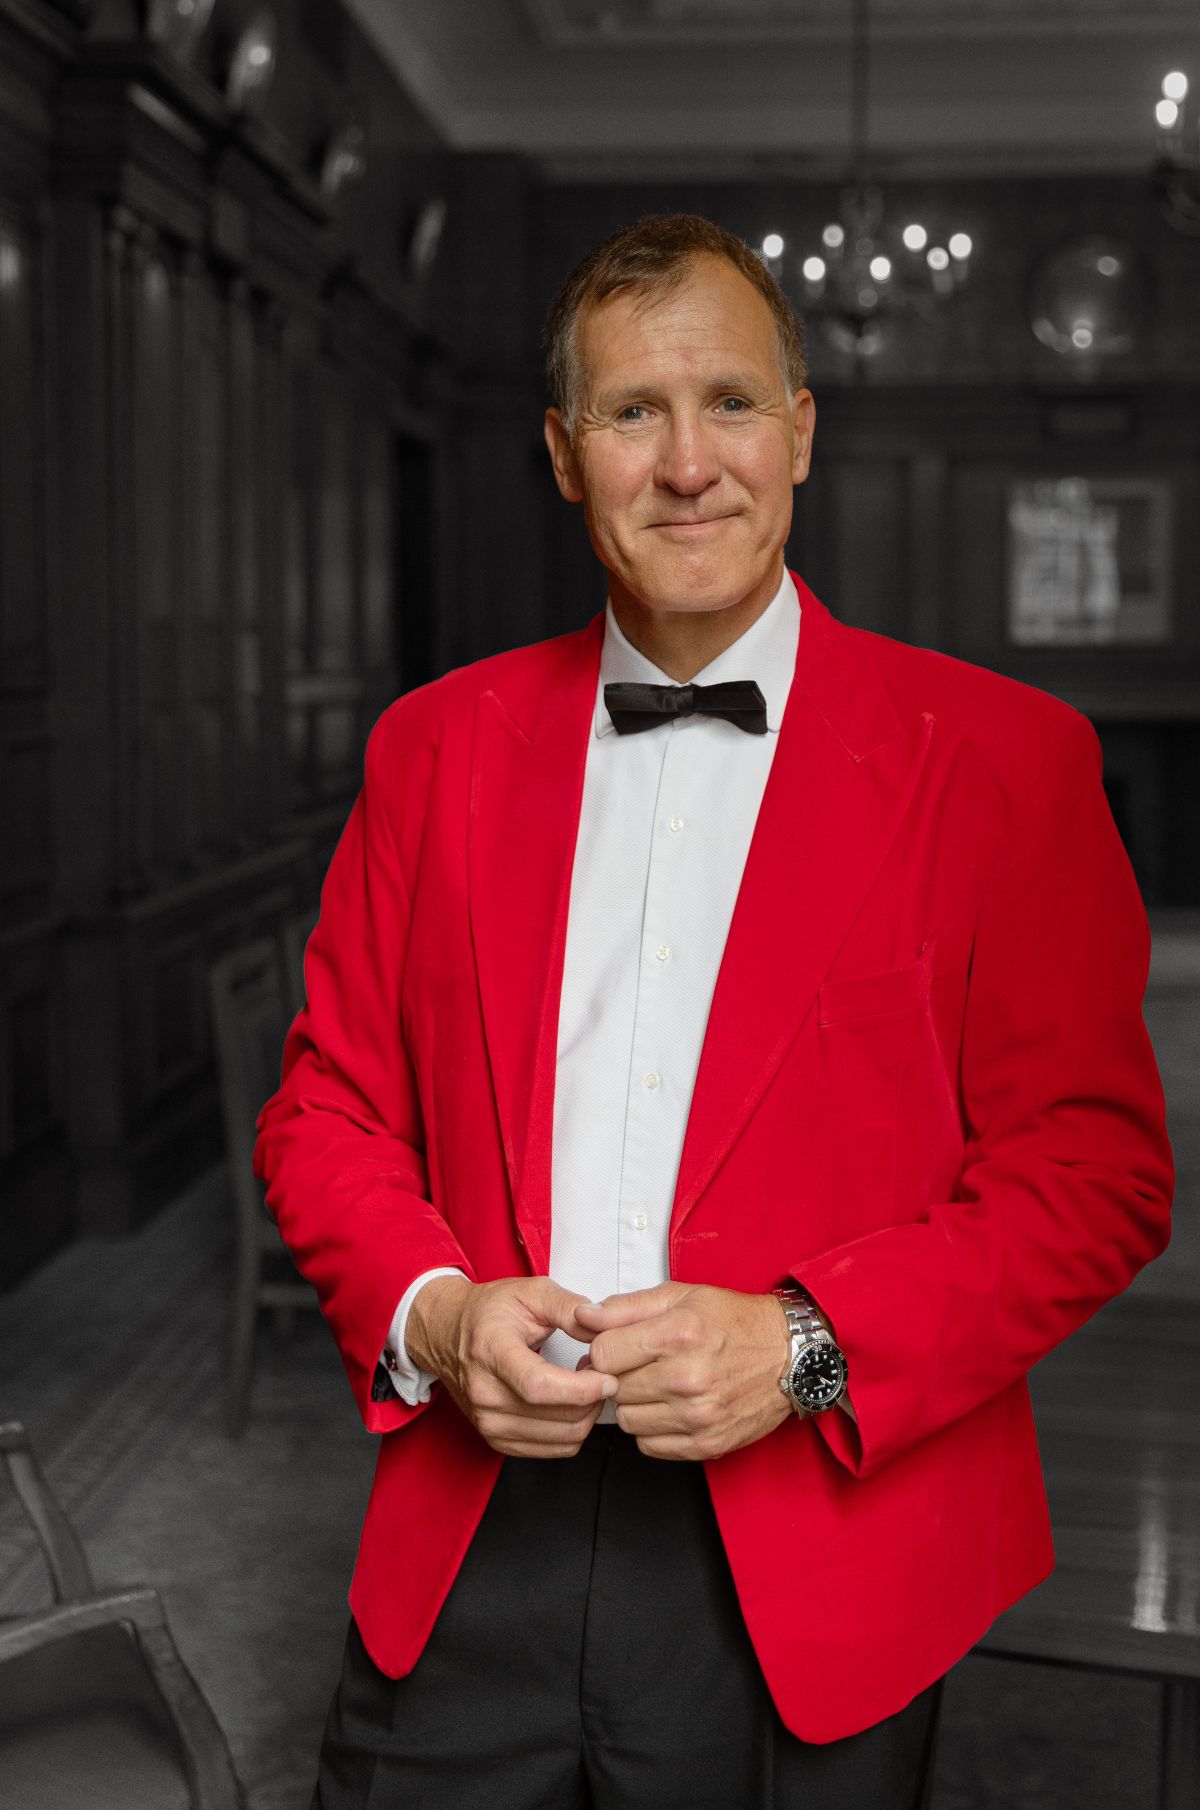 The Man in the Red Coat - Toastmaster James Hasler-Image-16